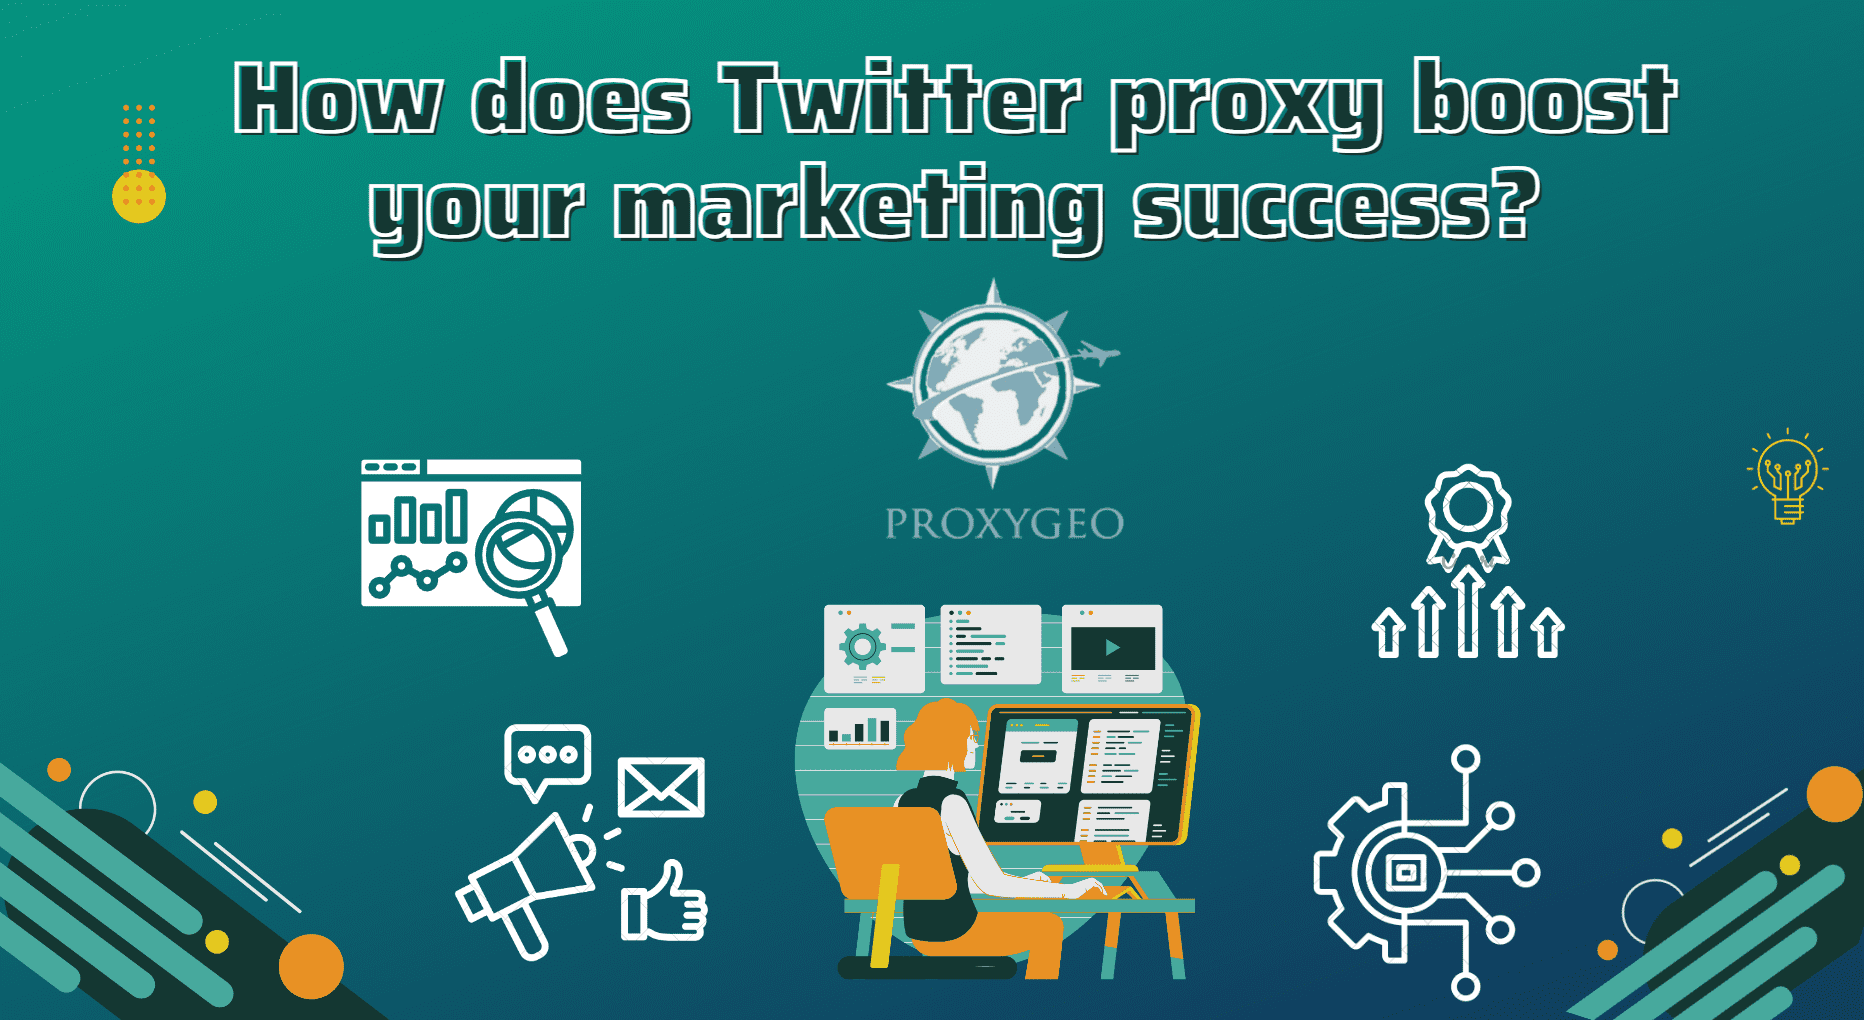 How do Twitter proxies boost your marketing success?